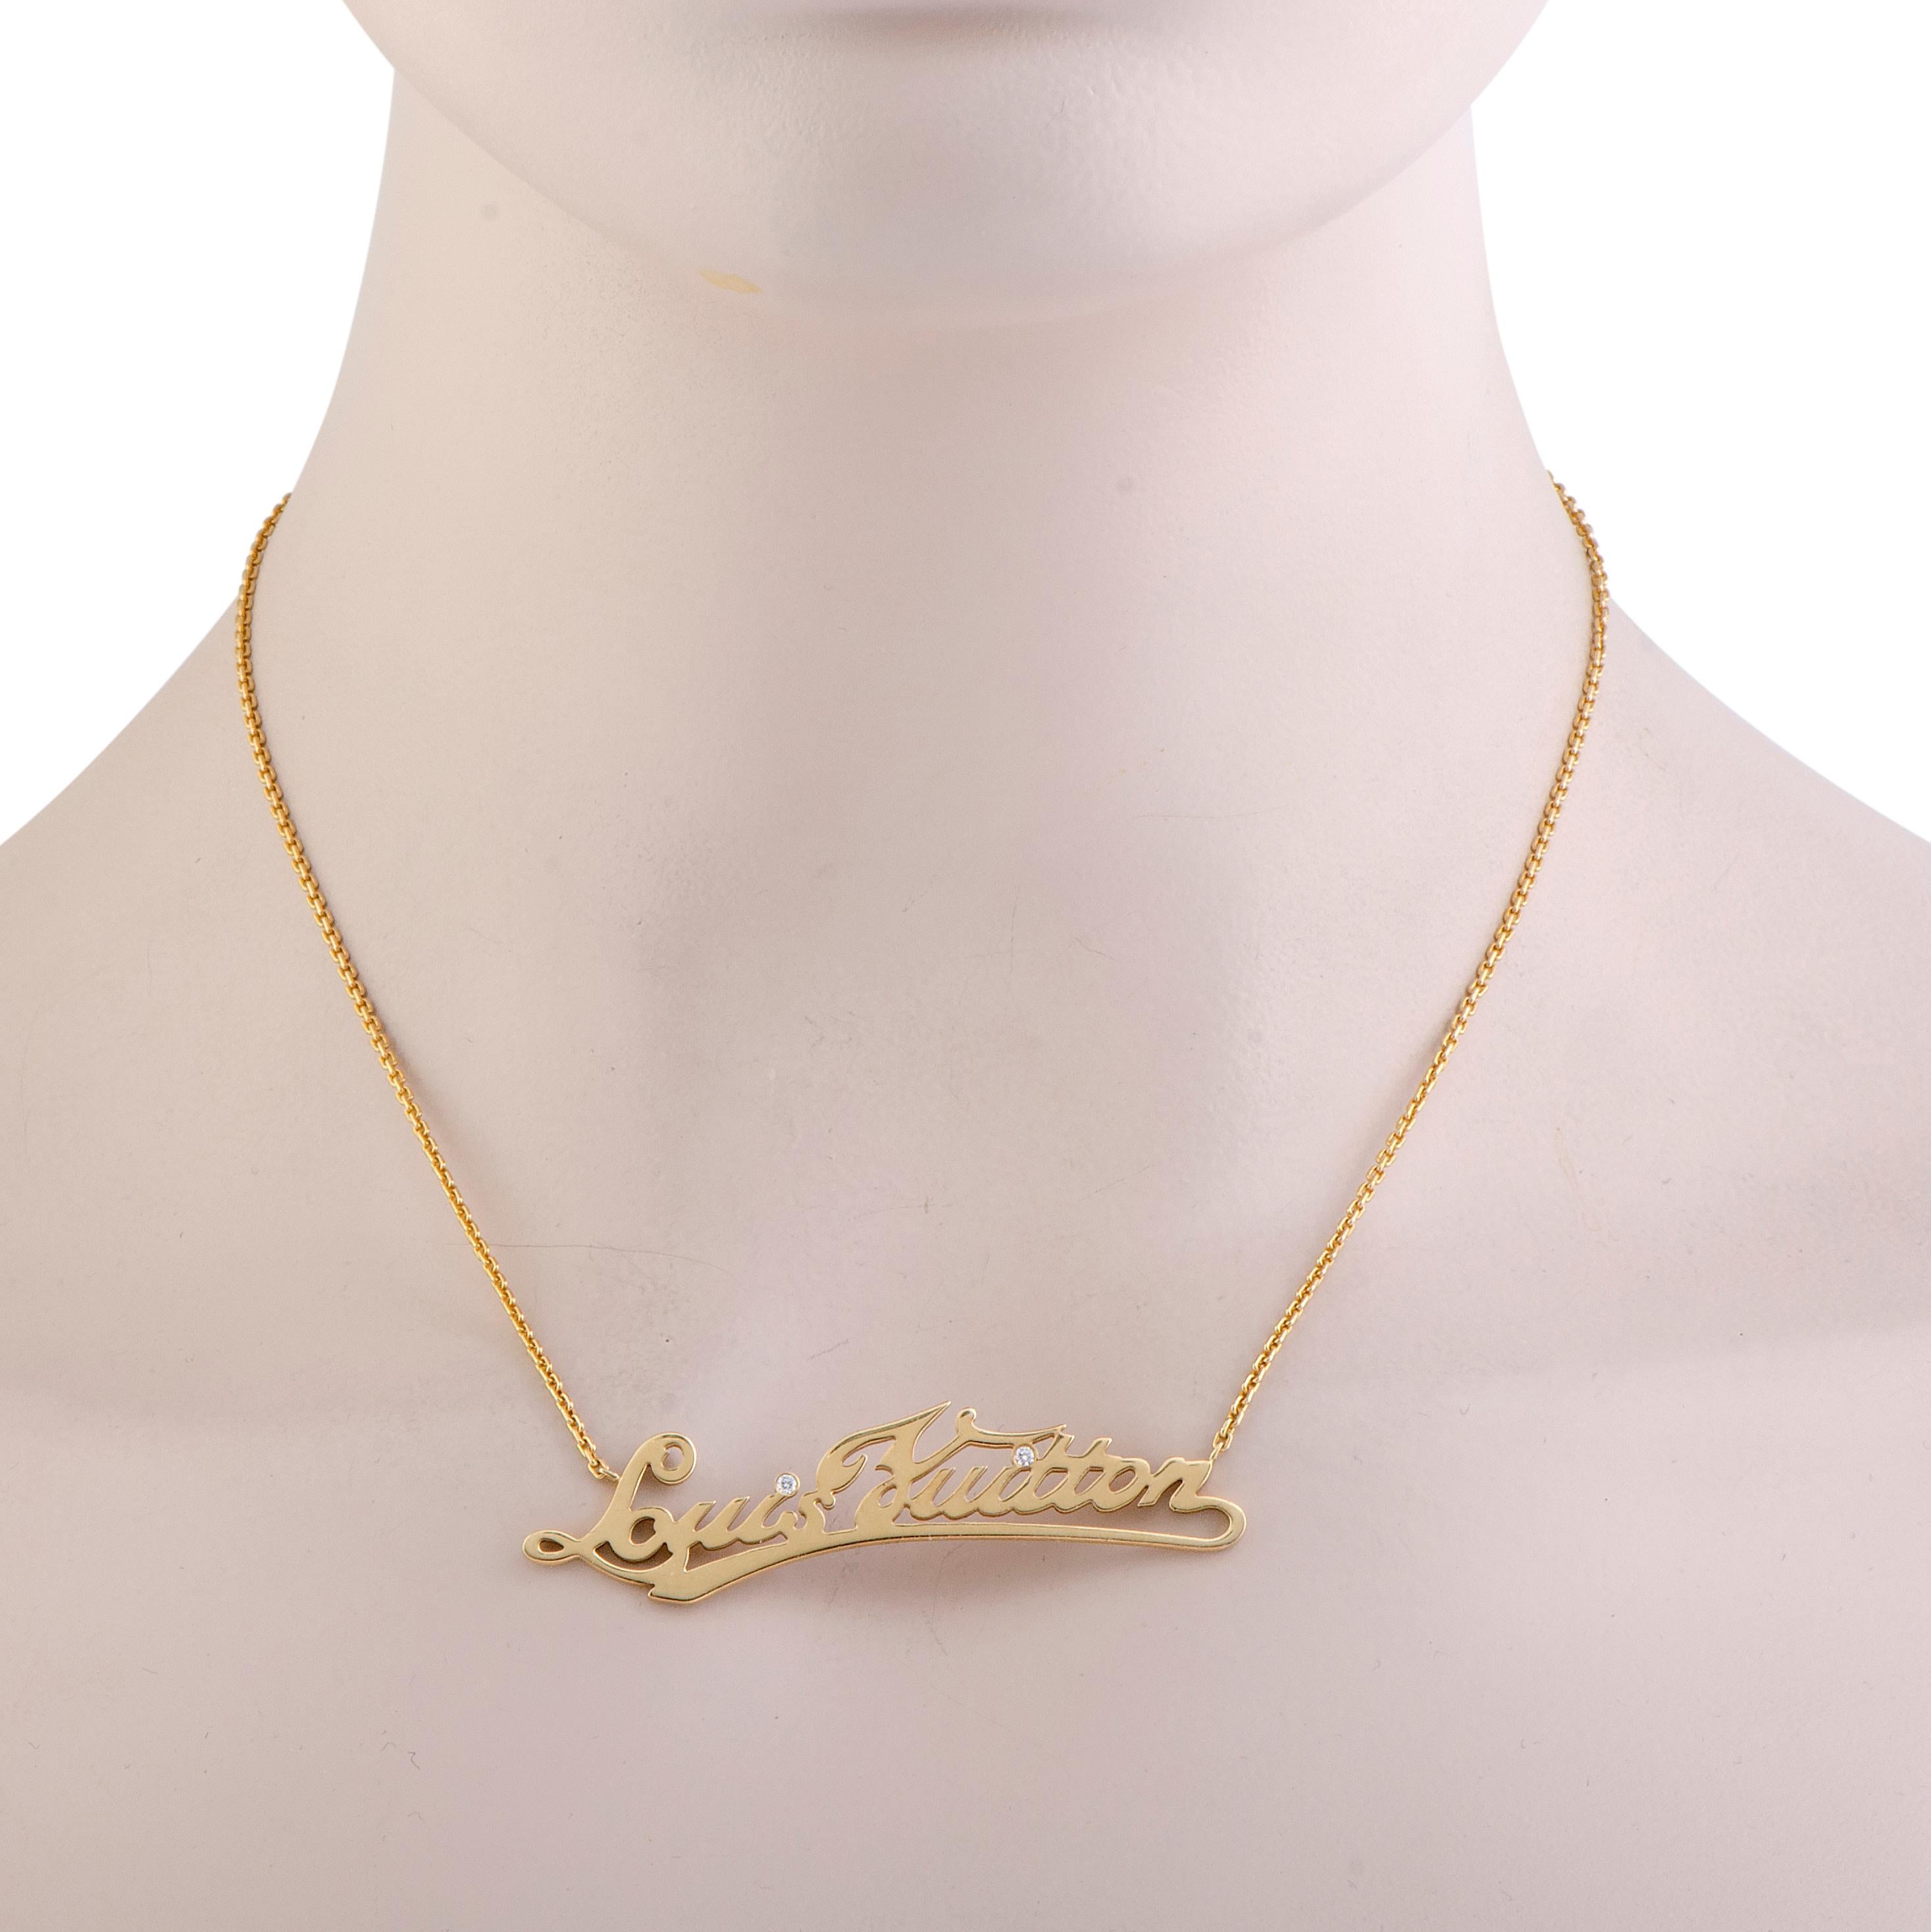 Boasting an incredibly bold design that is presented in stunning fashion in radiant 18K yellow gold, this Louis Vuitton necklace offers a look of utmost prestige. The pendant of the necklace takes the form of the brand’s name in cursive writing and